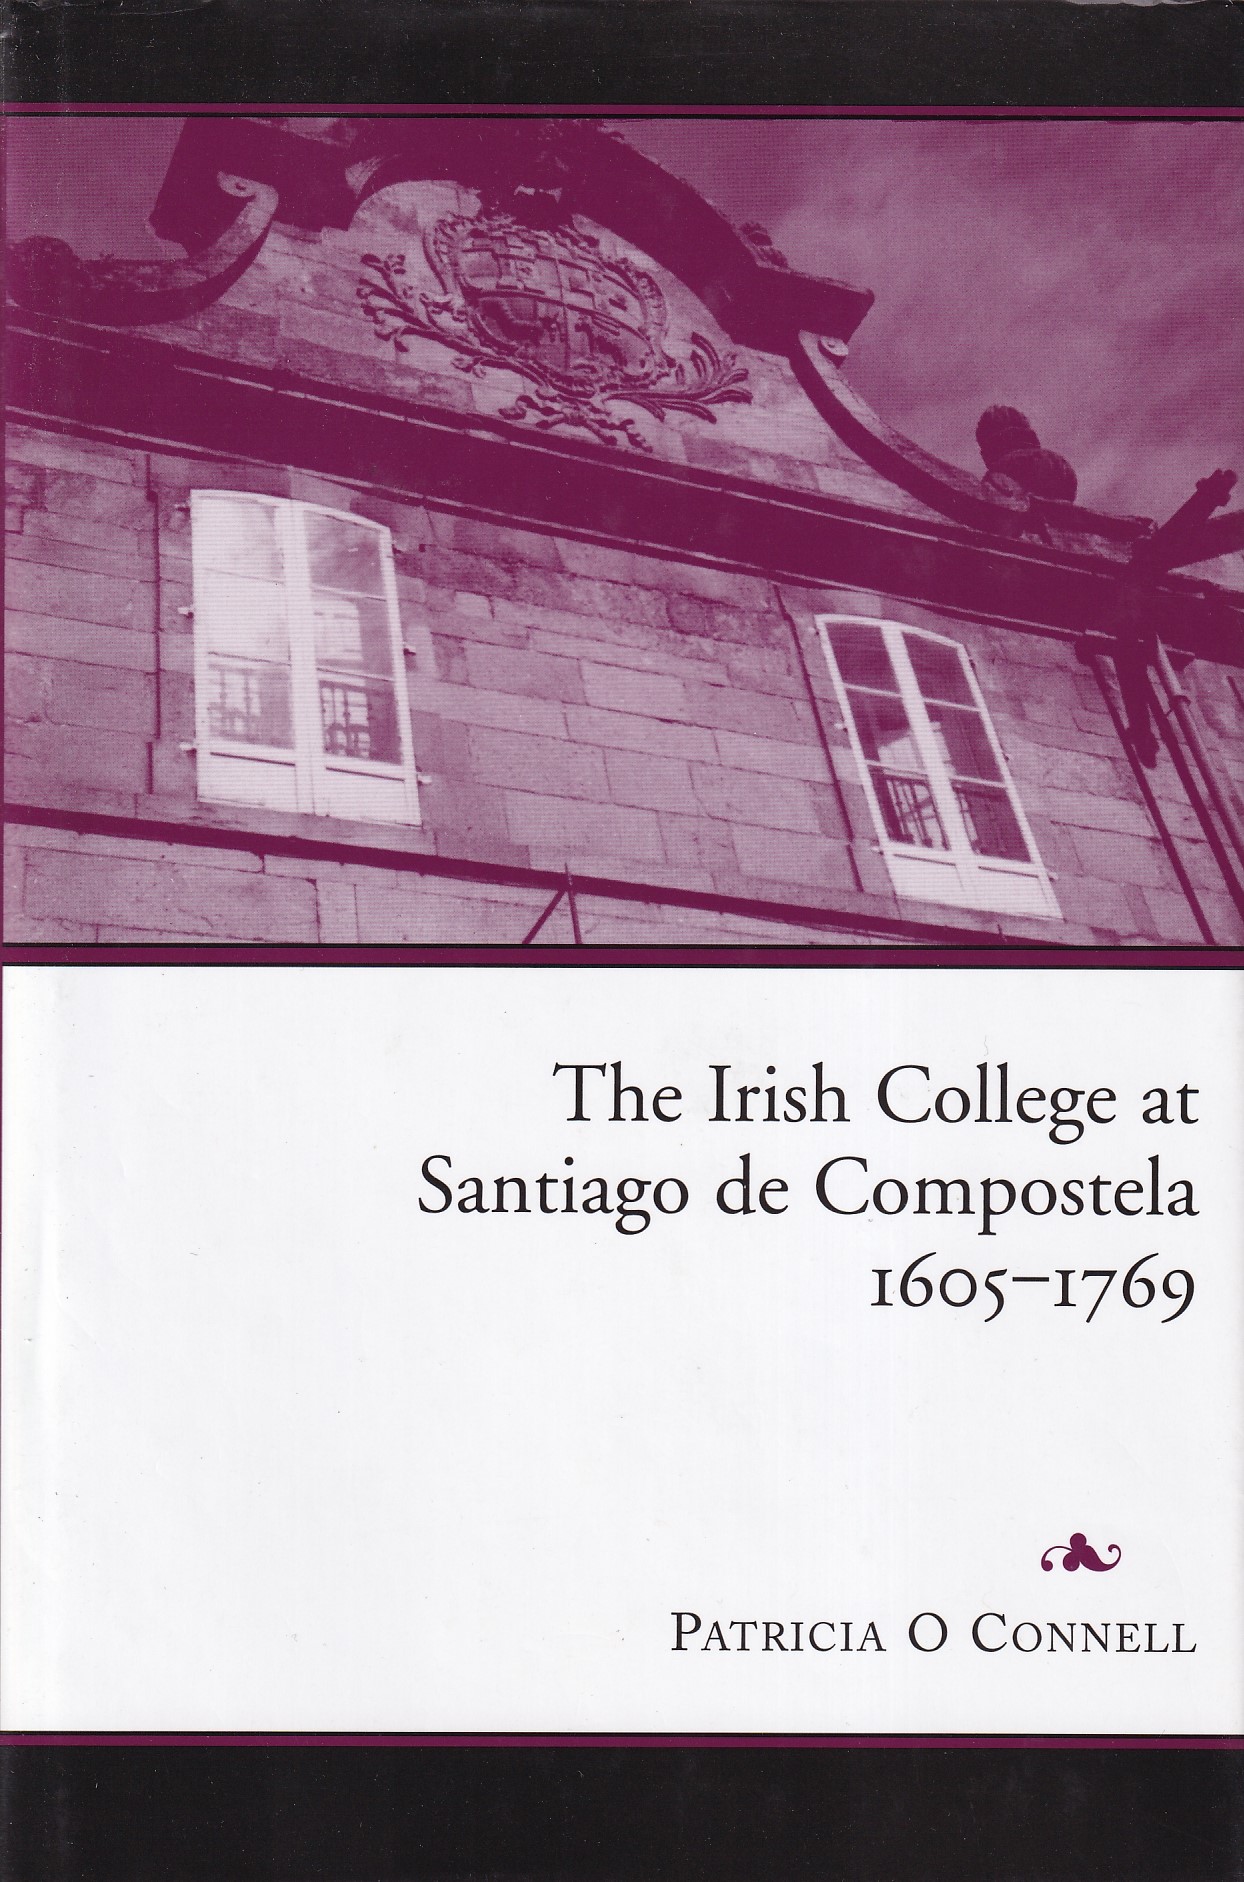 The Irish College at Santiago de Compostela, 1605 – 1769 | Patricia O Connell | Charlie Byrne's